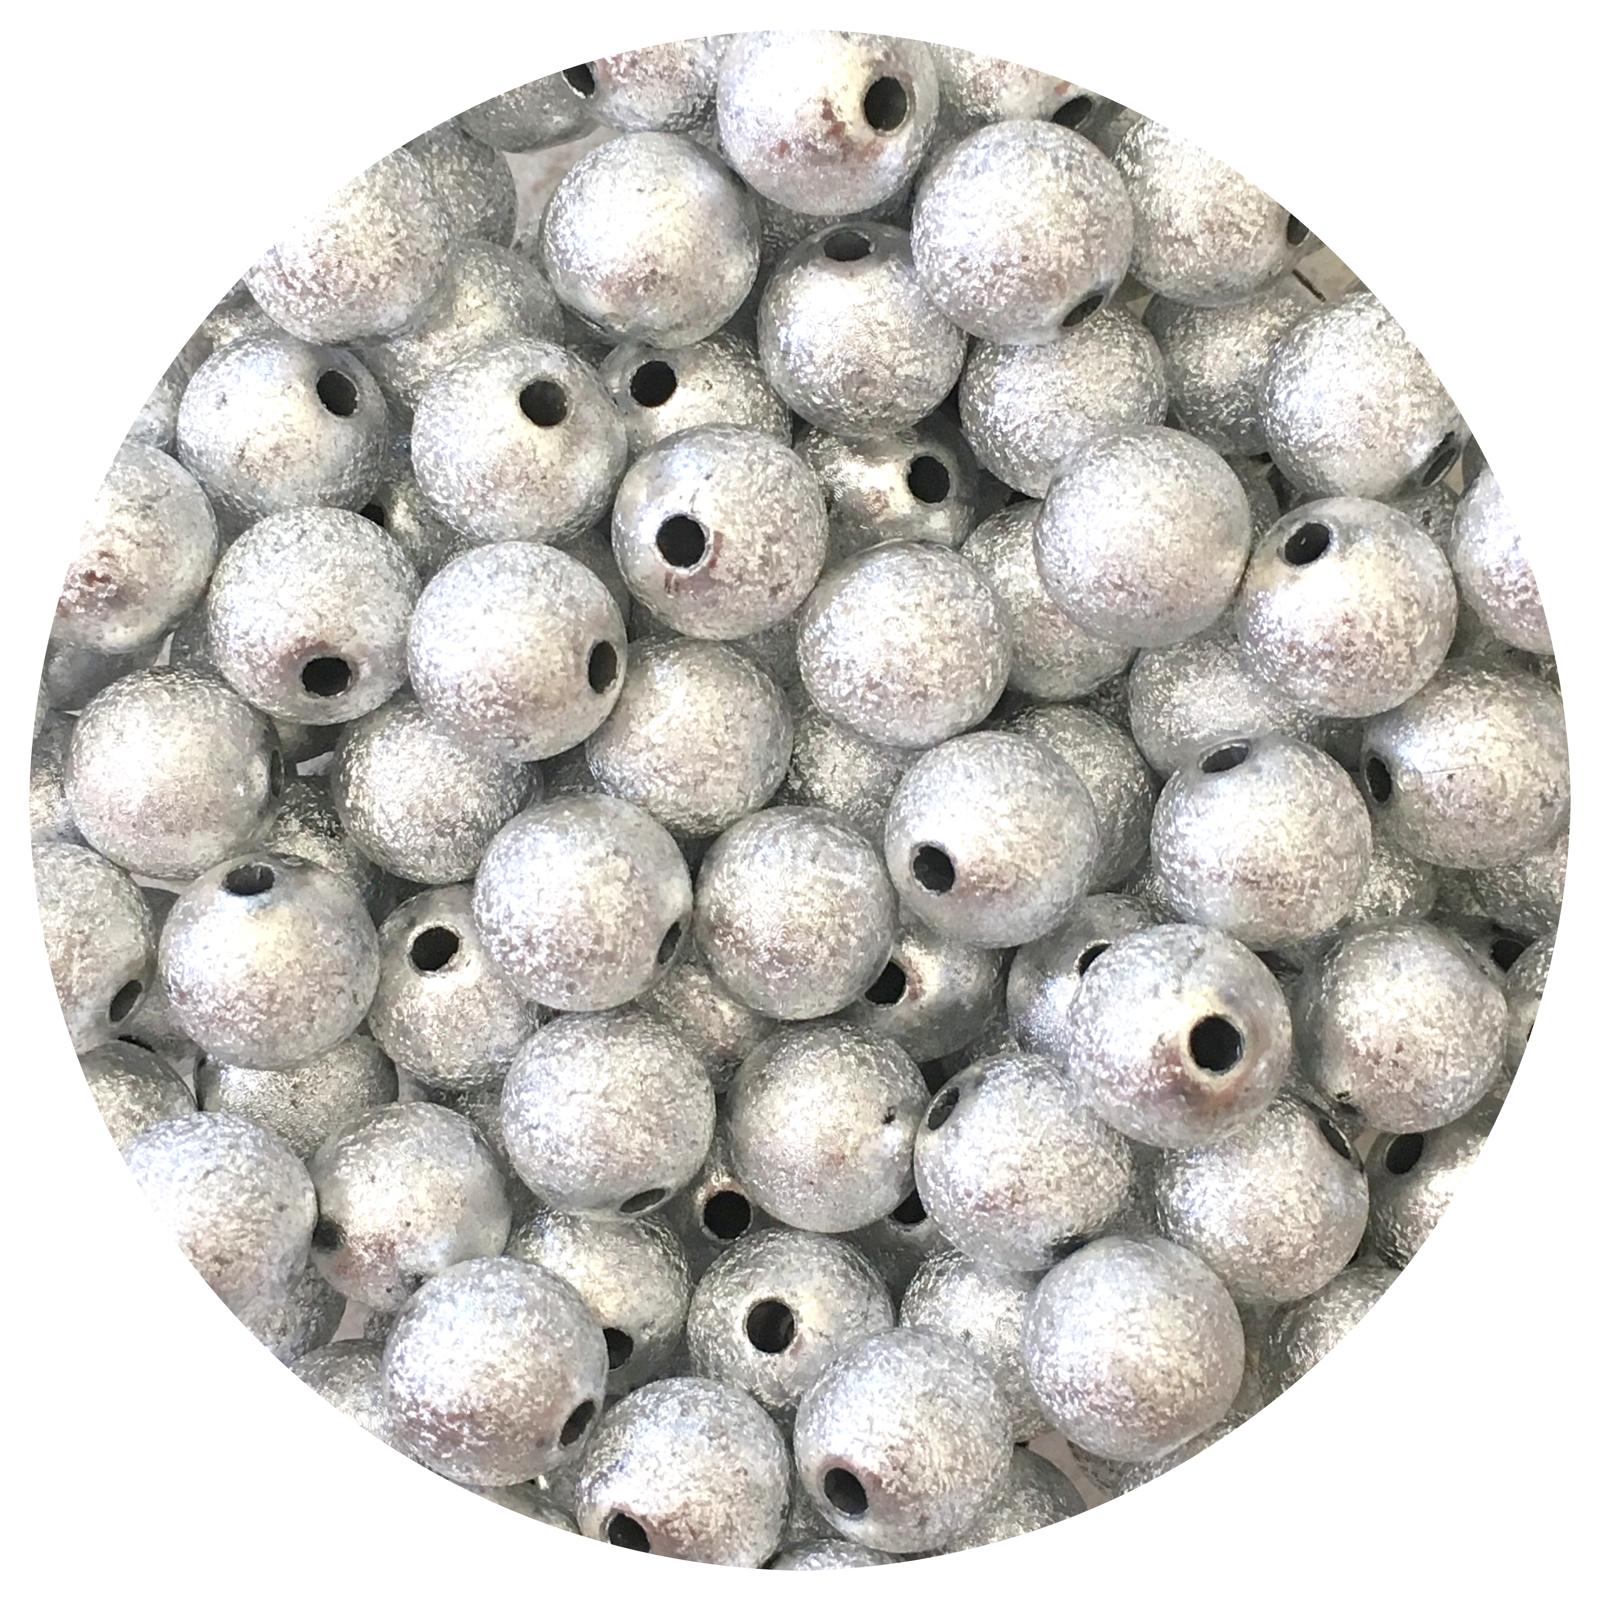 12mm Silver Stardust Round Acrylic Beads - 5 Beads